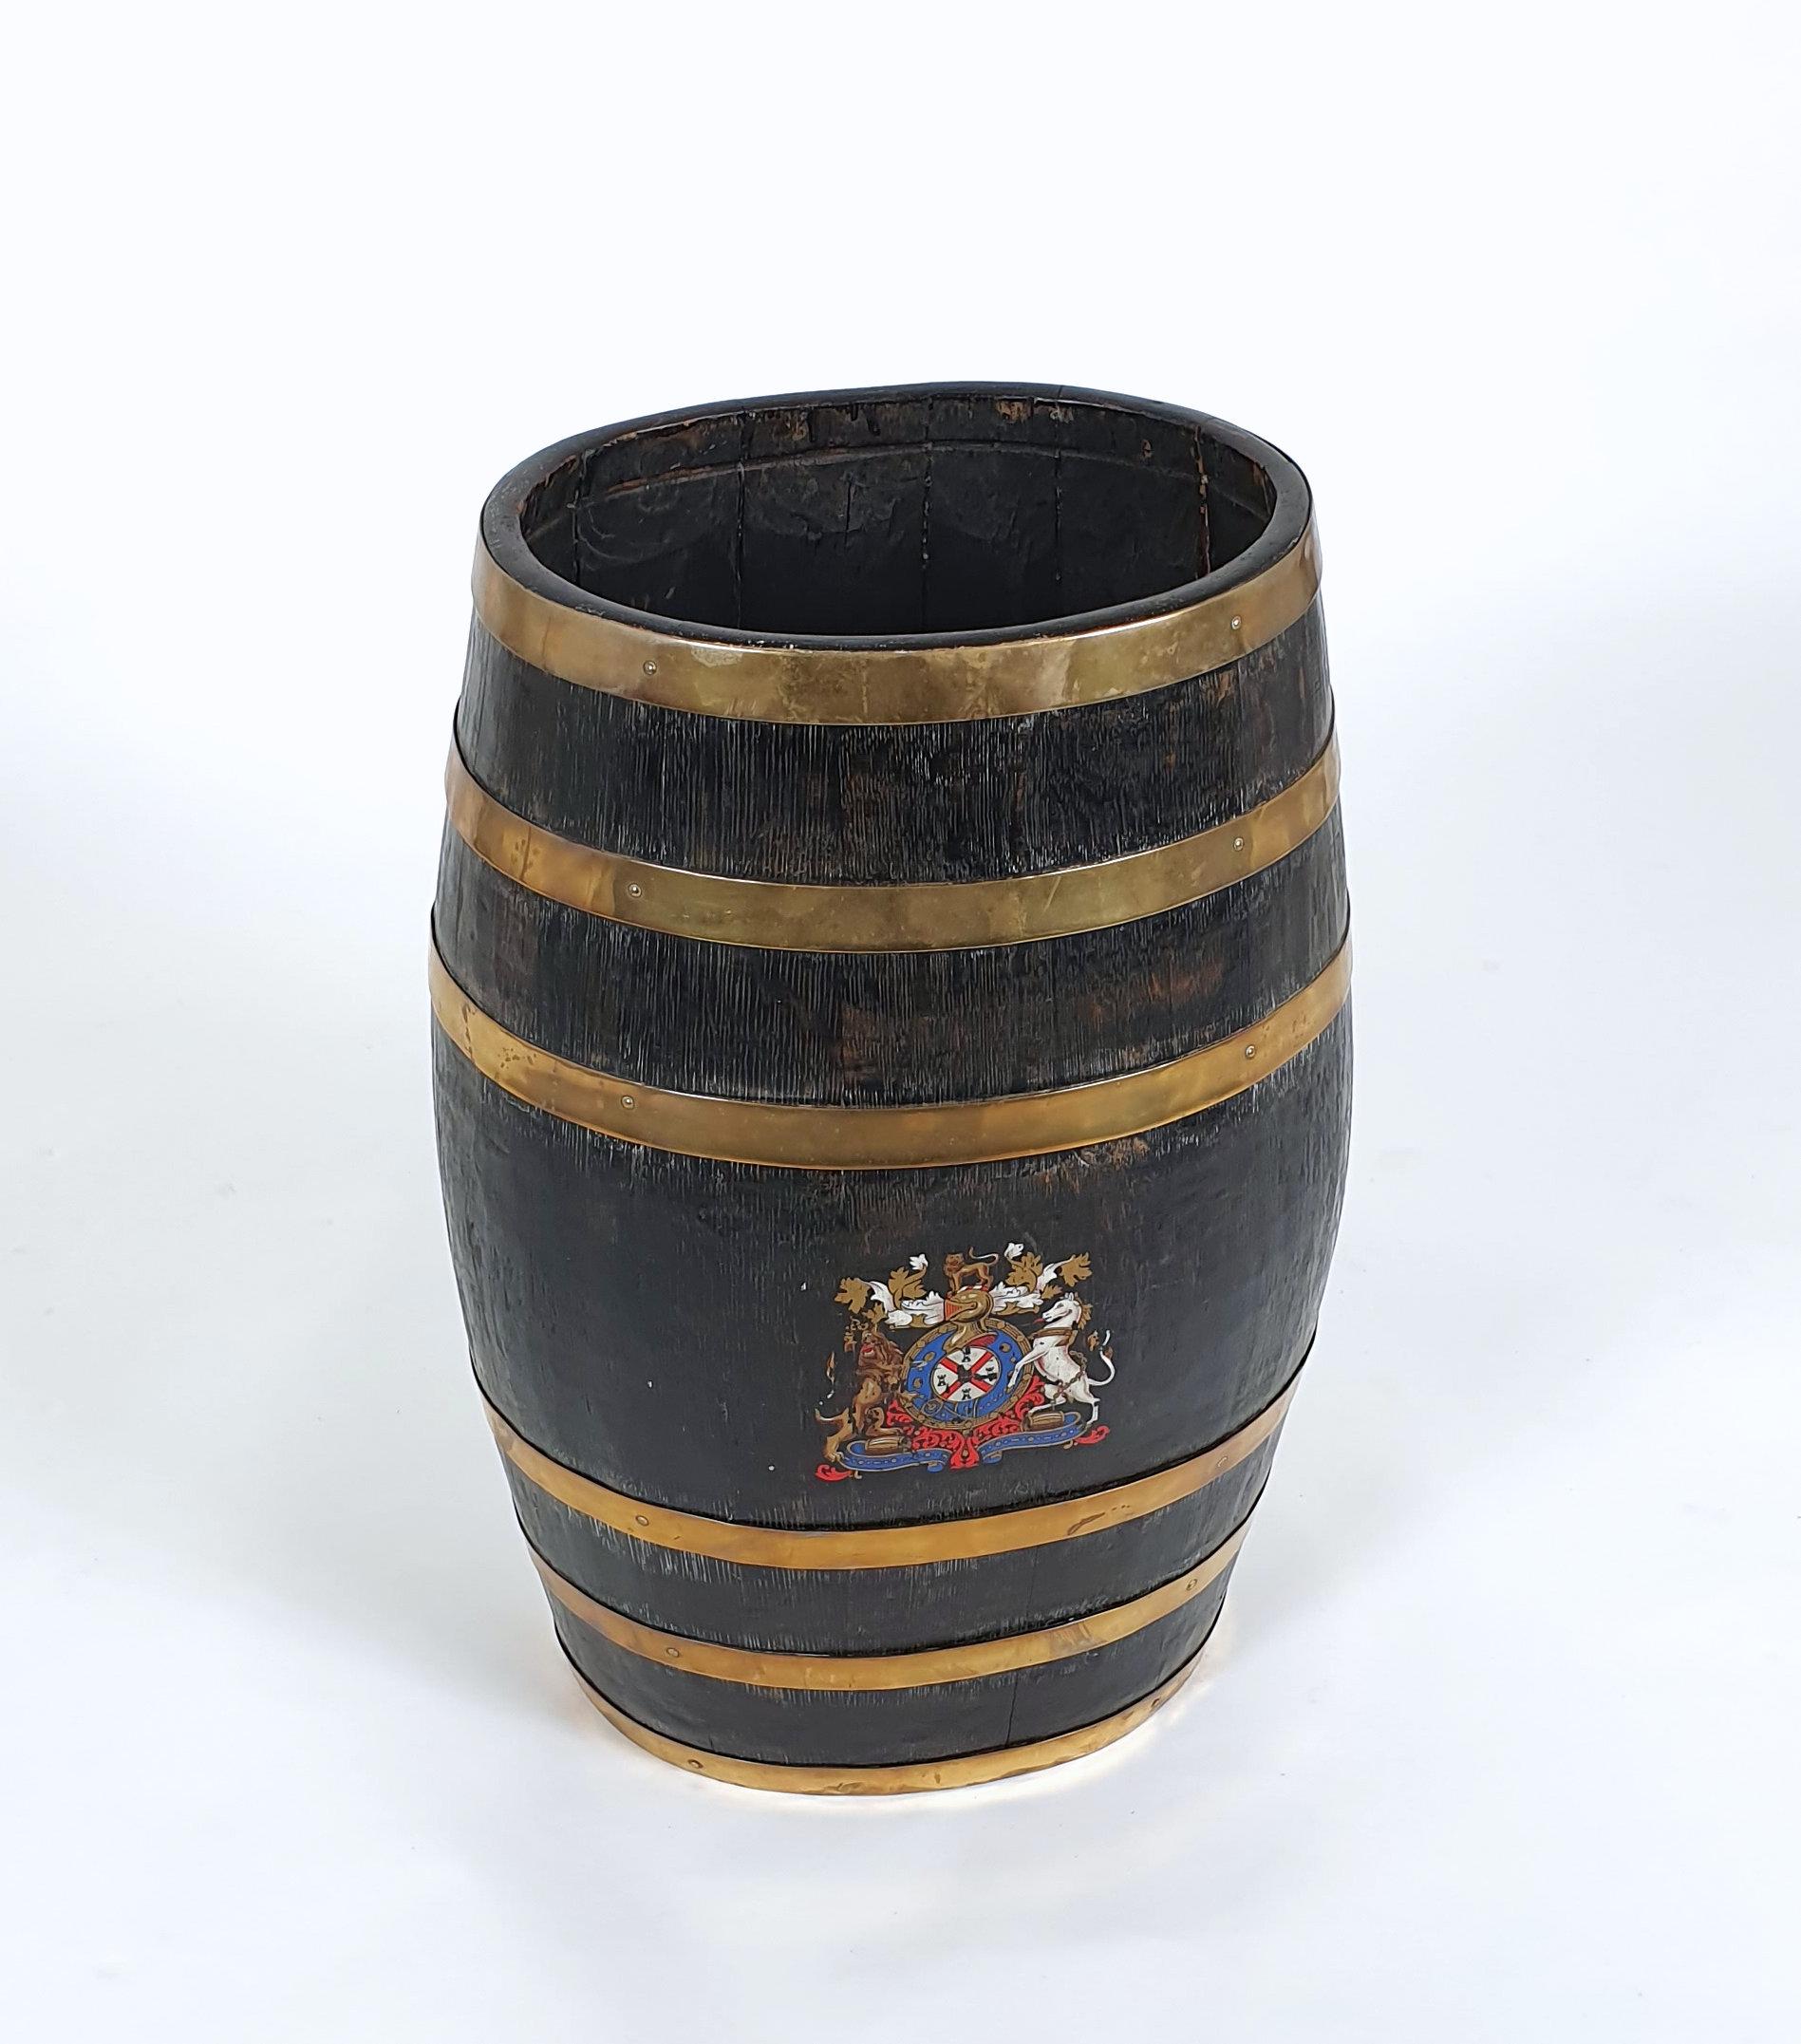 This very handsome and quirky Victorian oak and brass stick stand is painted with a Royal coat of arms and was originally a wine or ale barrel. It measures 23 in – 58.5 cm in height with a width of 15 in – 38.1 cm and a depth of 11 in – 28 cm. This